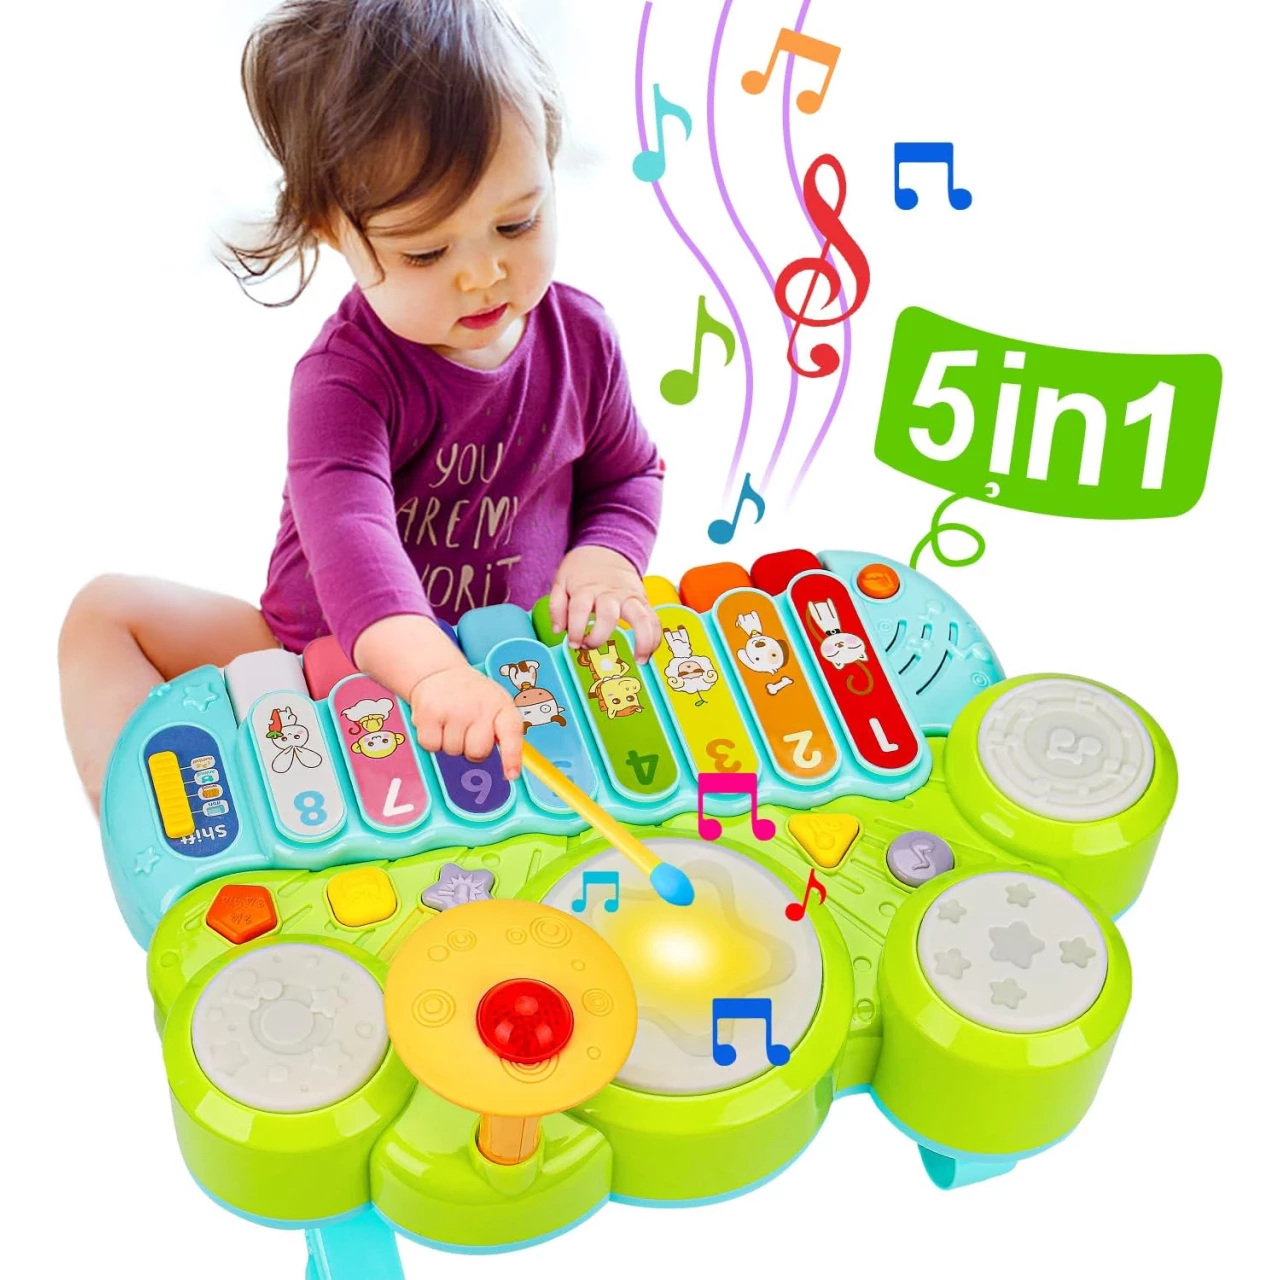 AugToy Baby Musical Toys 3 in 1 Piano Keyboard Xylophone Drum Set